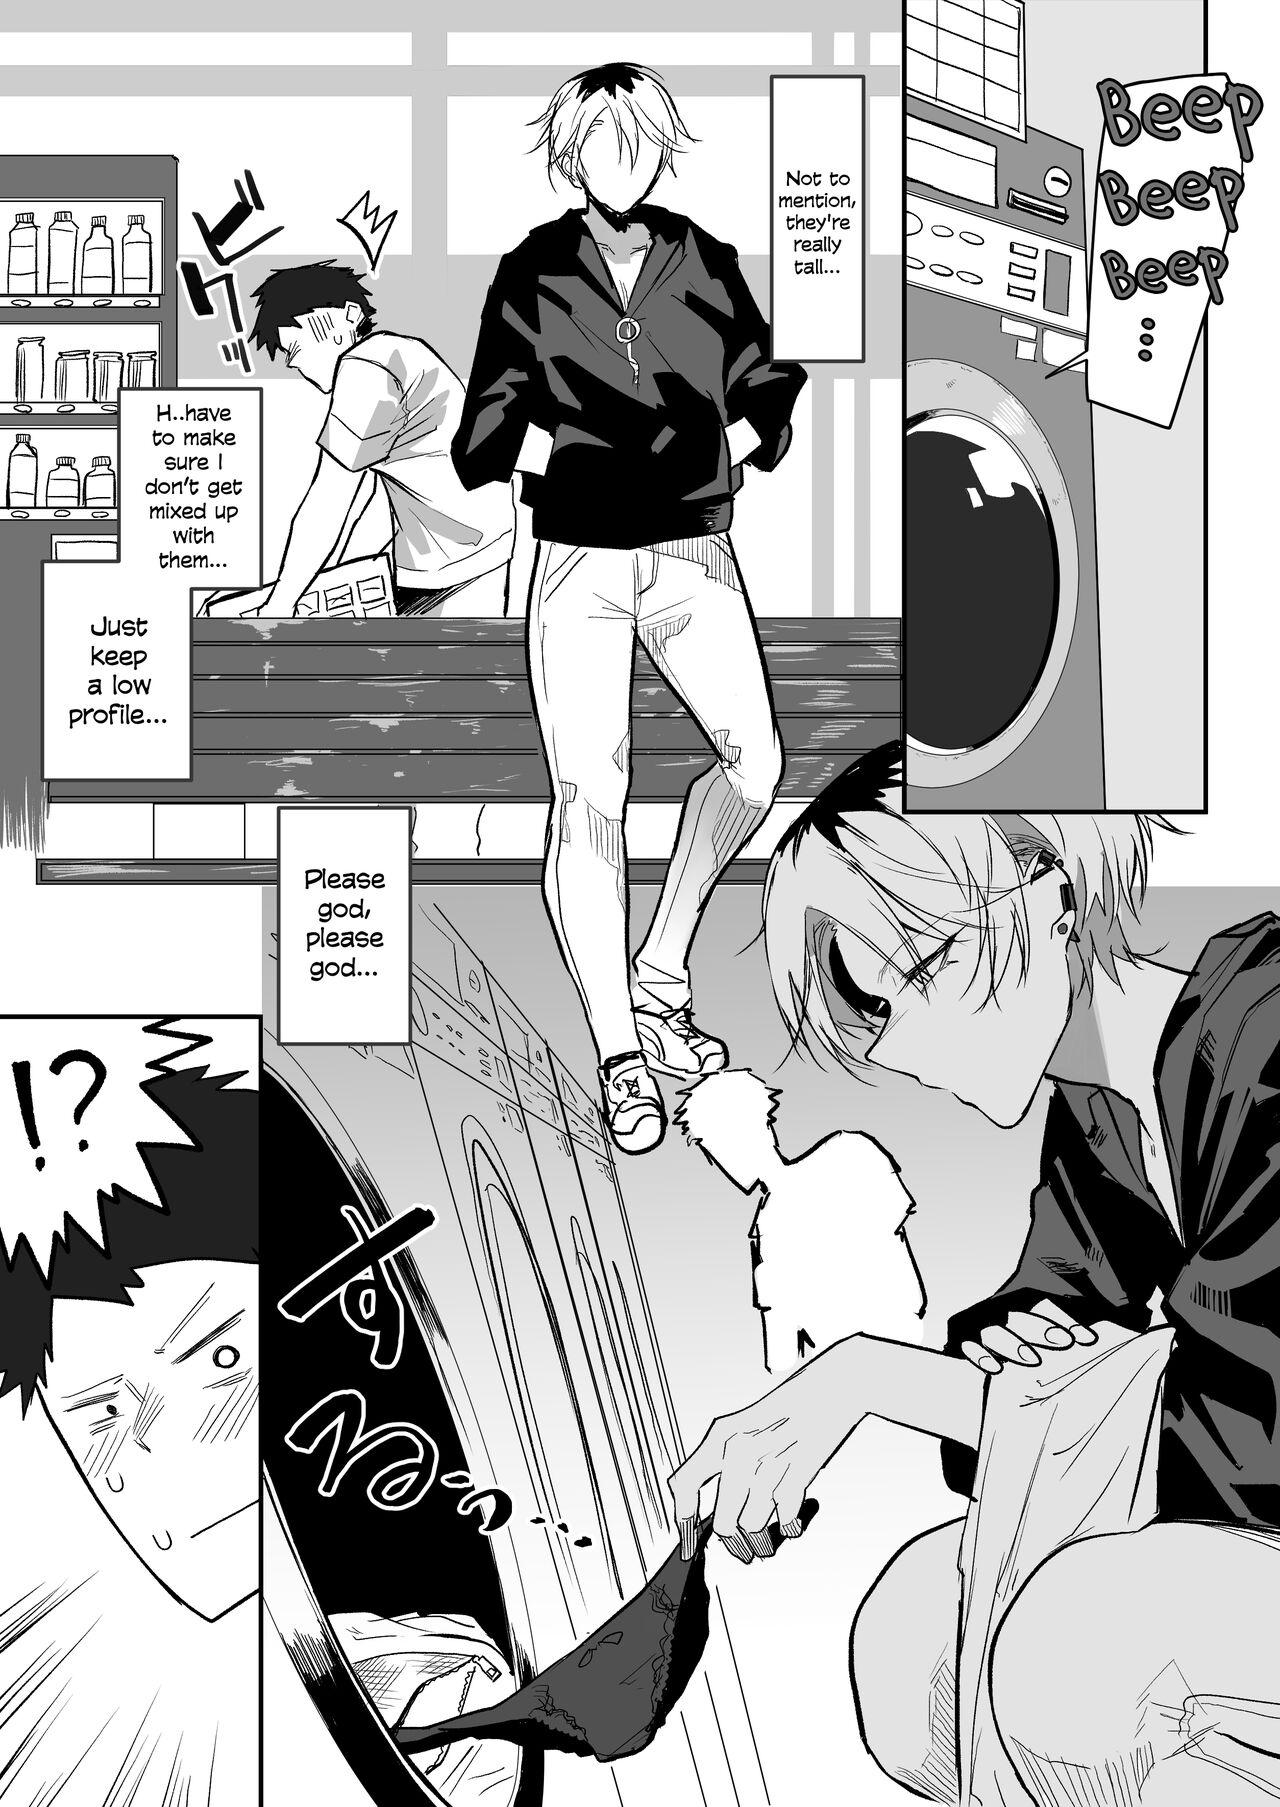 Suruba Coin Laundry de Kowai Yankee ni Karamareru Manga | A Manga About Getting Mixed Up With A Scary Delinquent At The Laundromat - Original Longhair - Page 2